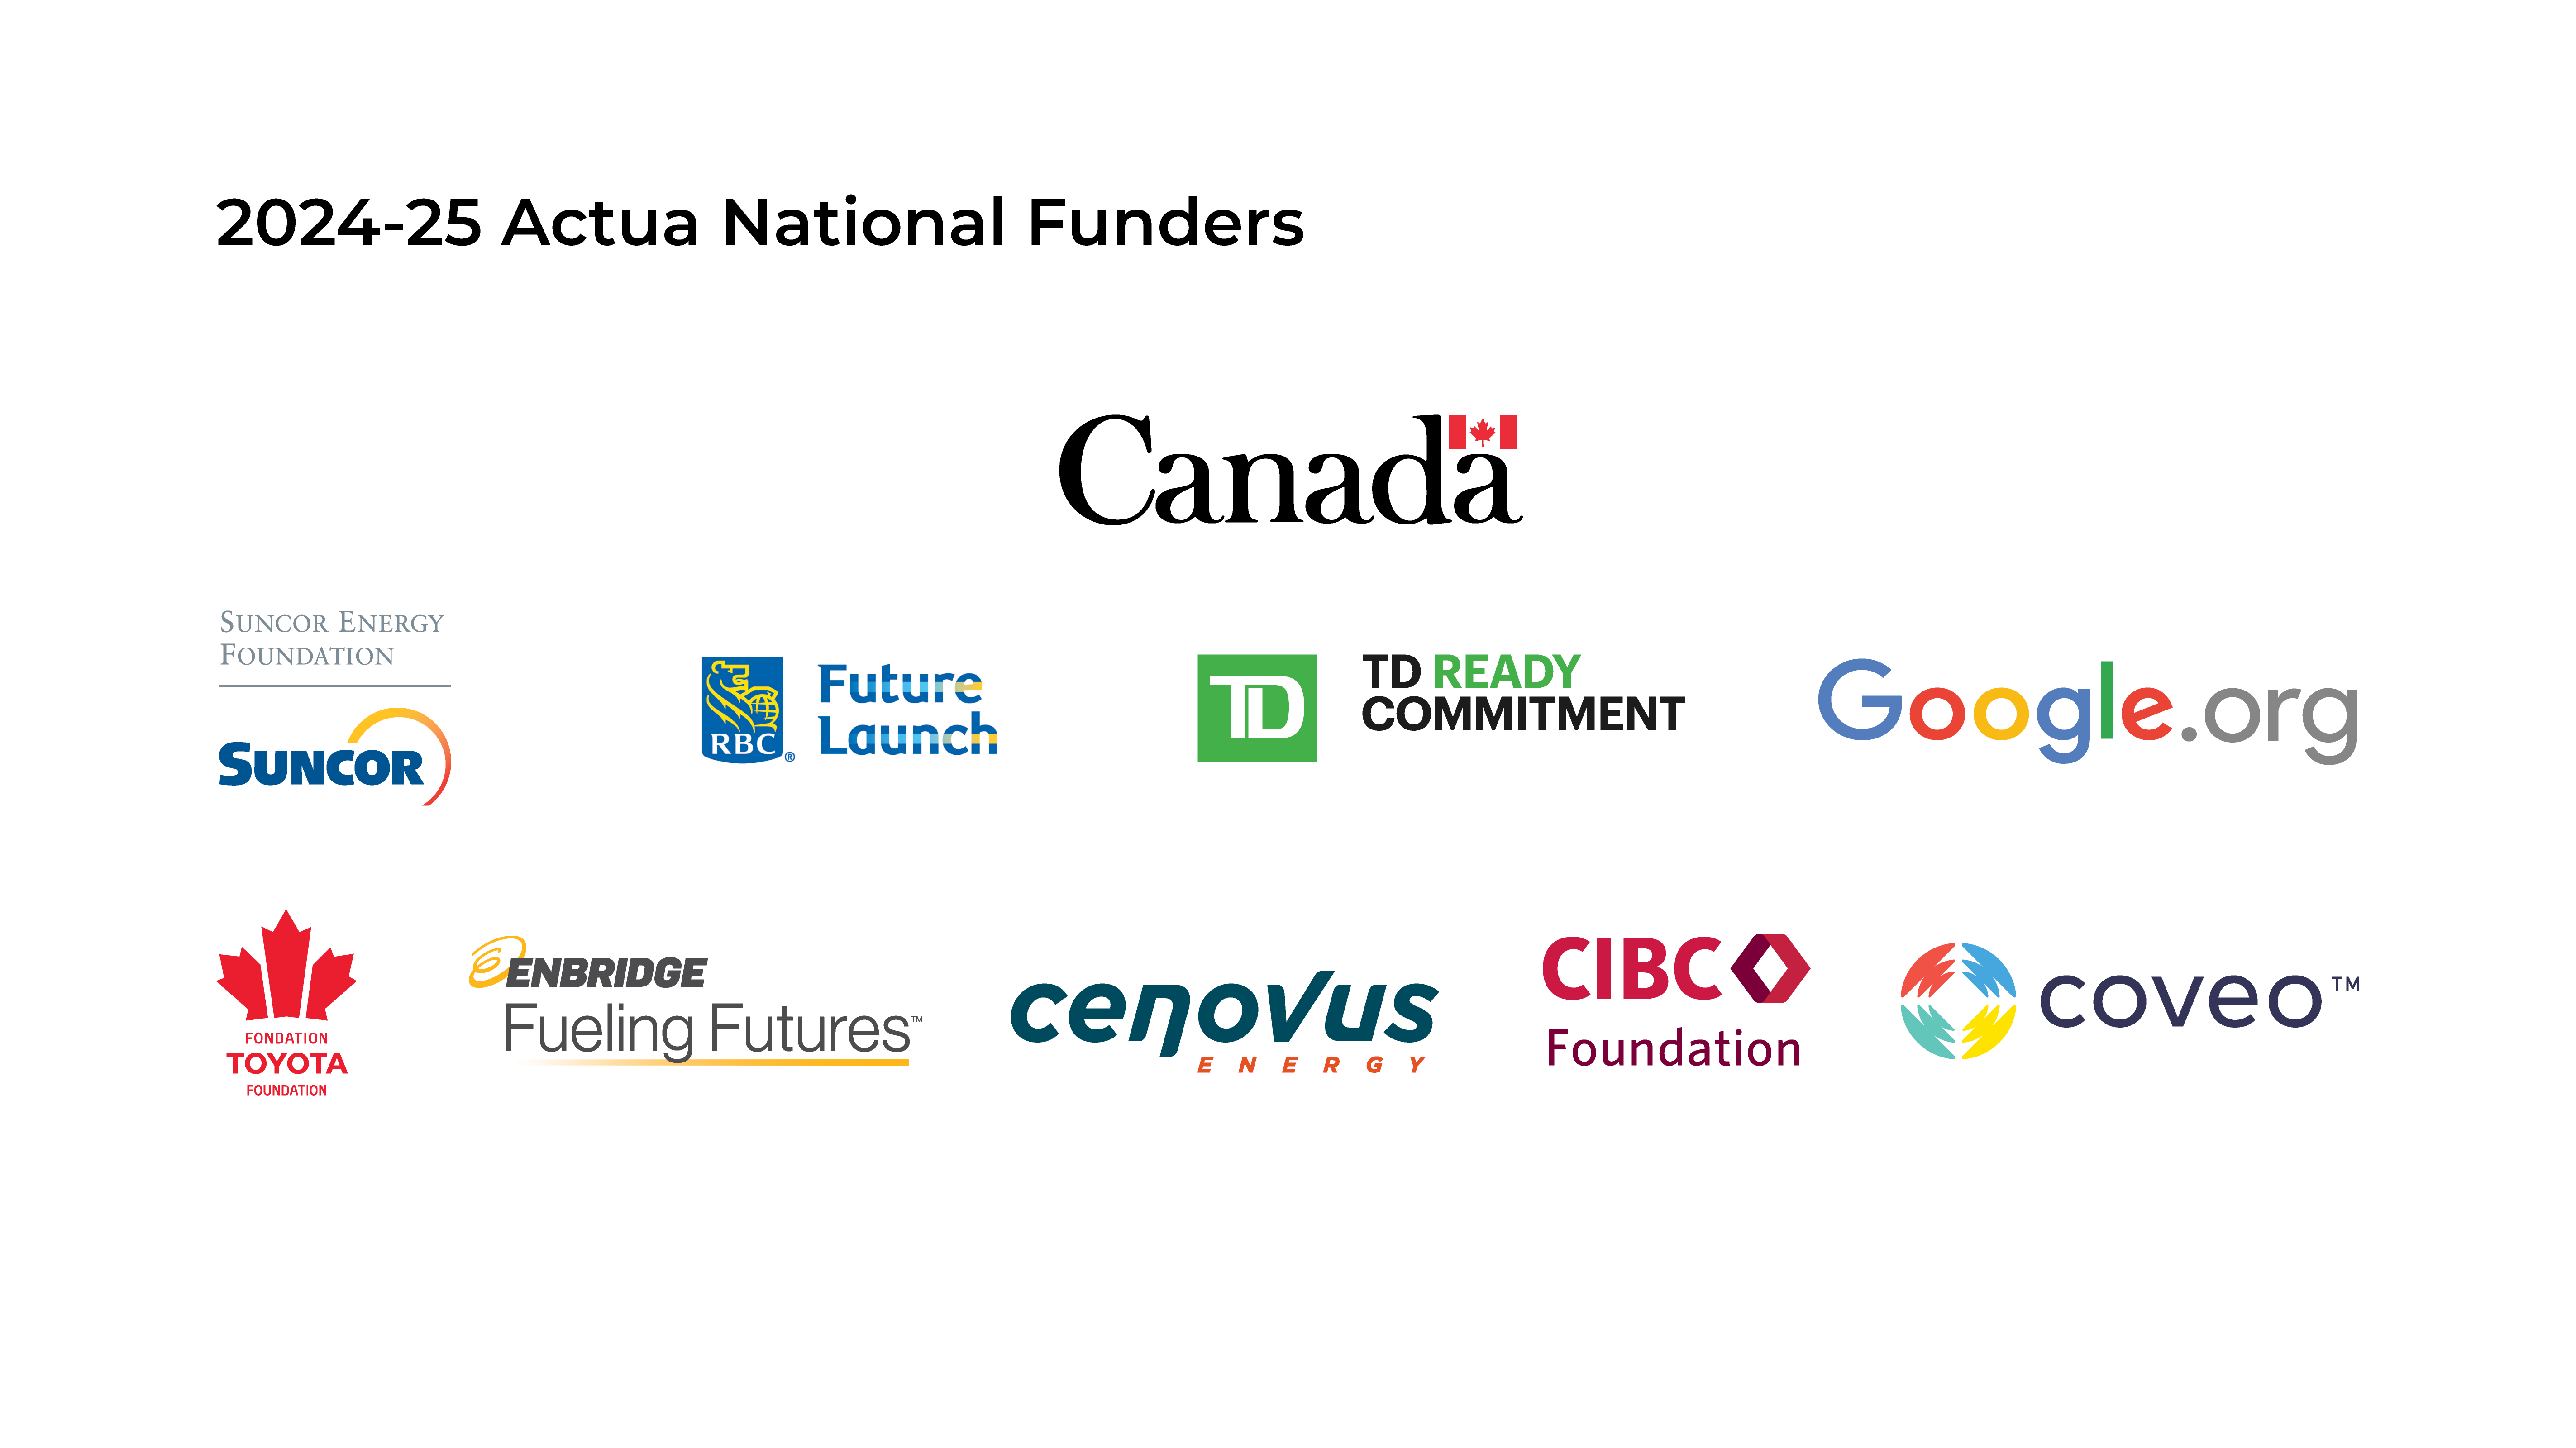 Image of Actua National Funders for 2024-2025